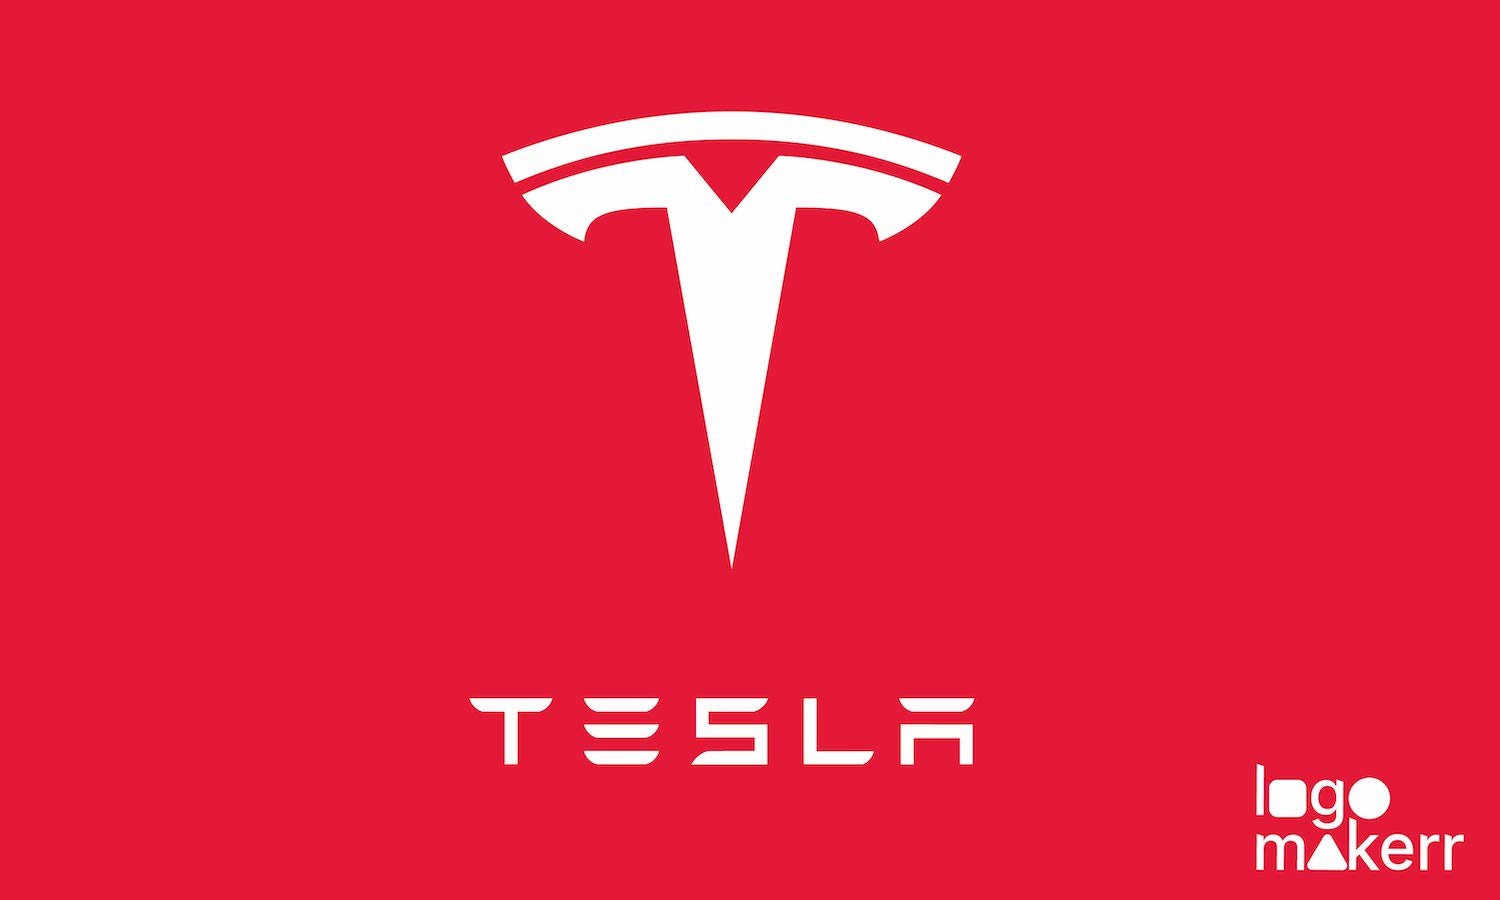 tesla logo on the red background